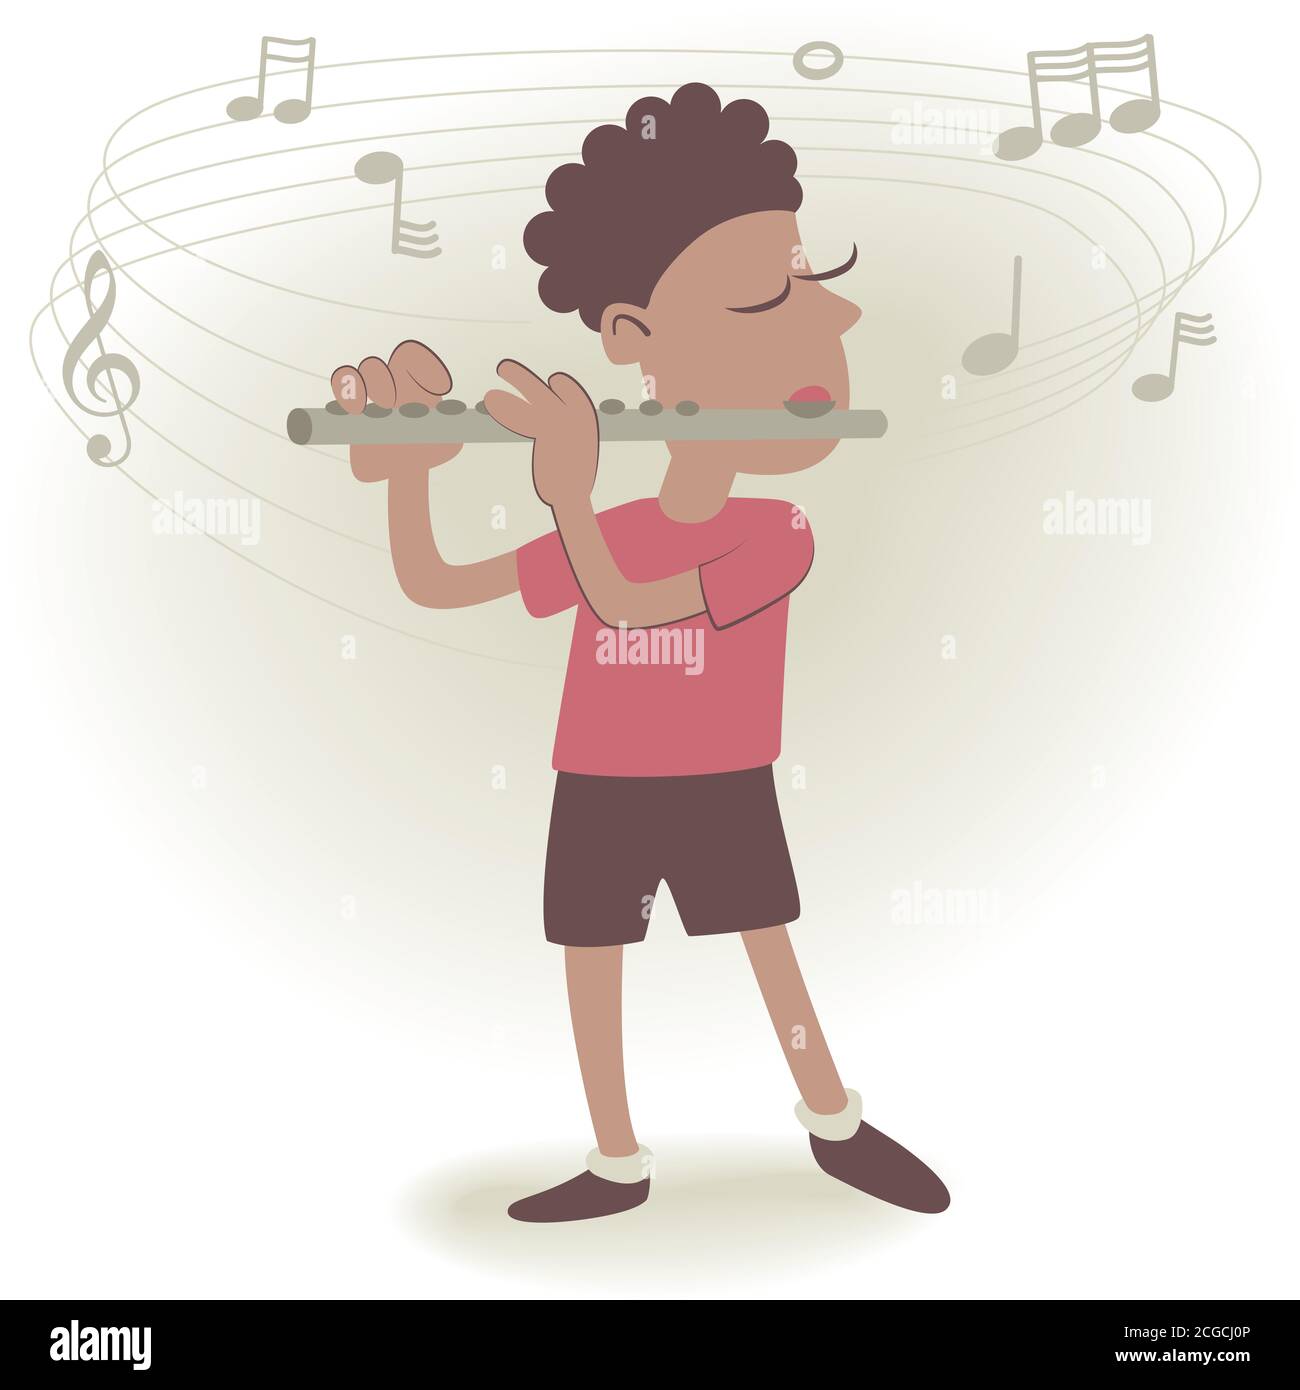 Retro style illustration of a little boy playing the flute. Stock Vector